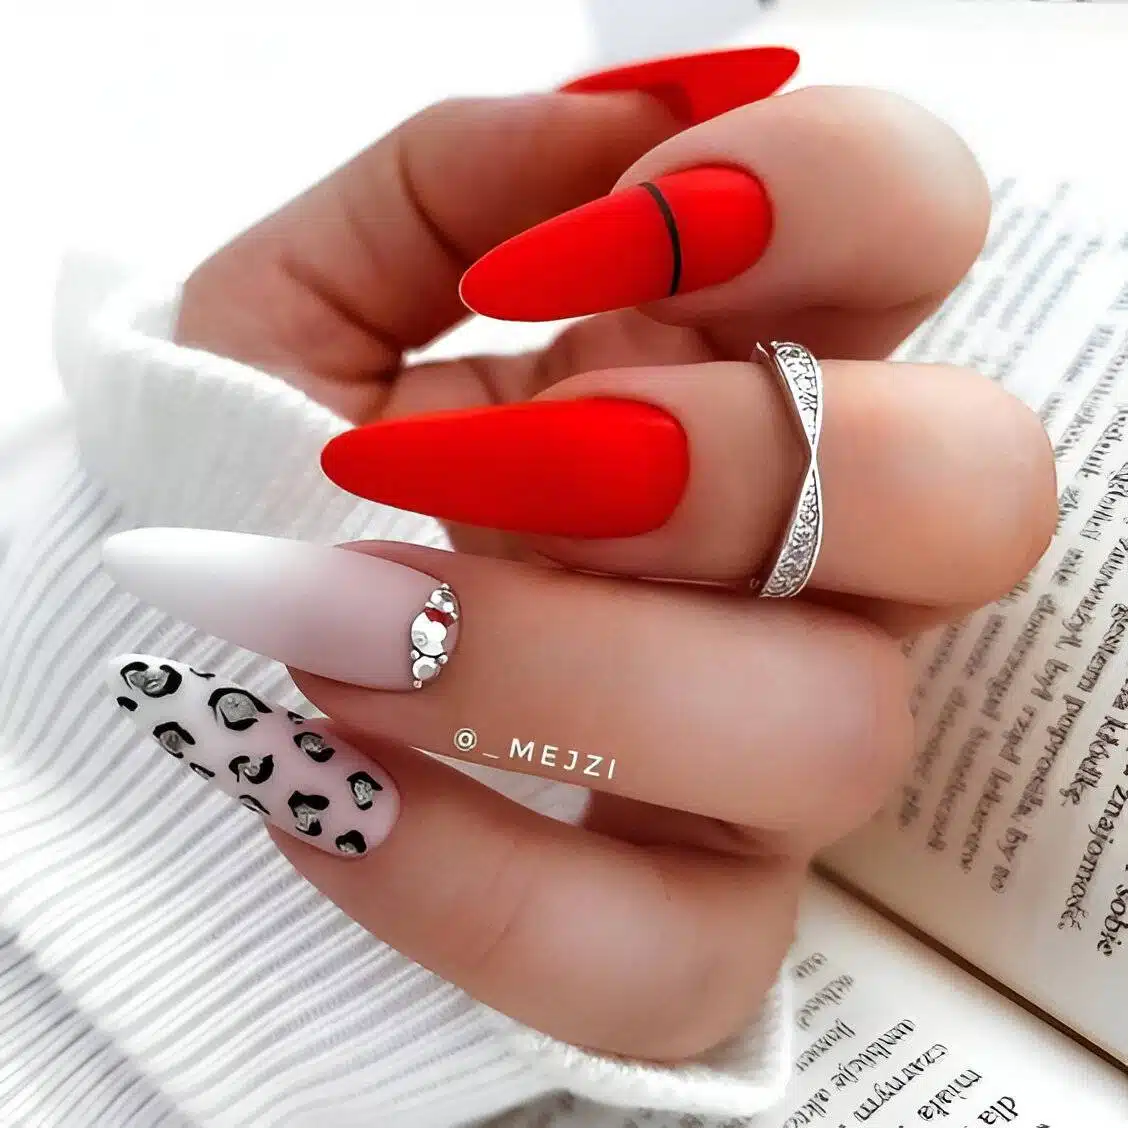 30 Red Nail Designs That Are The Epitome Of Feminine Beauty - 233